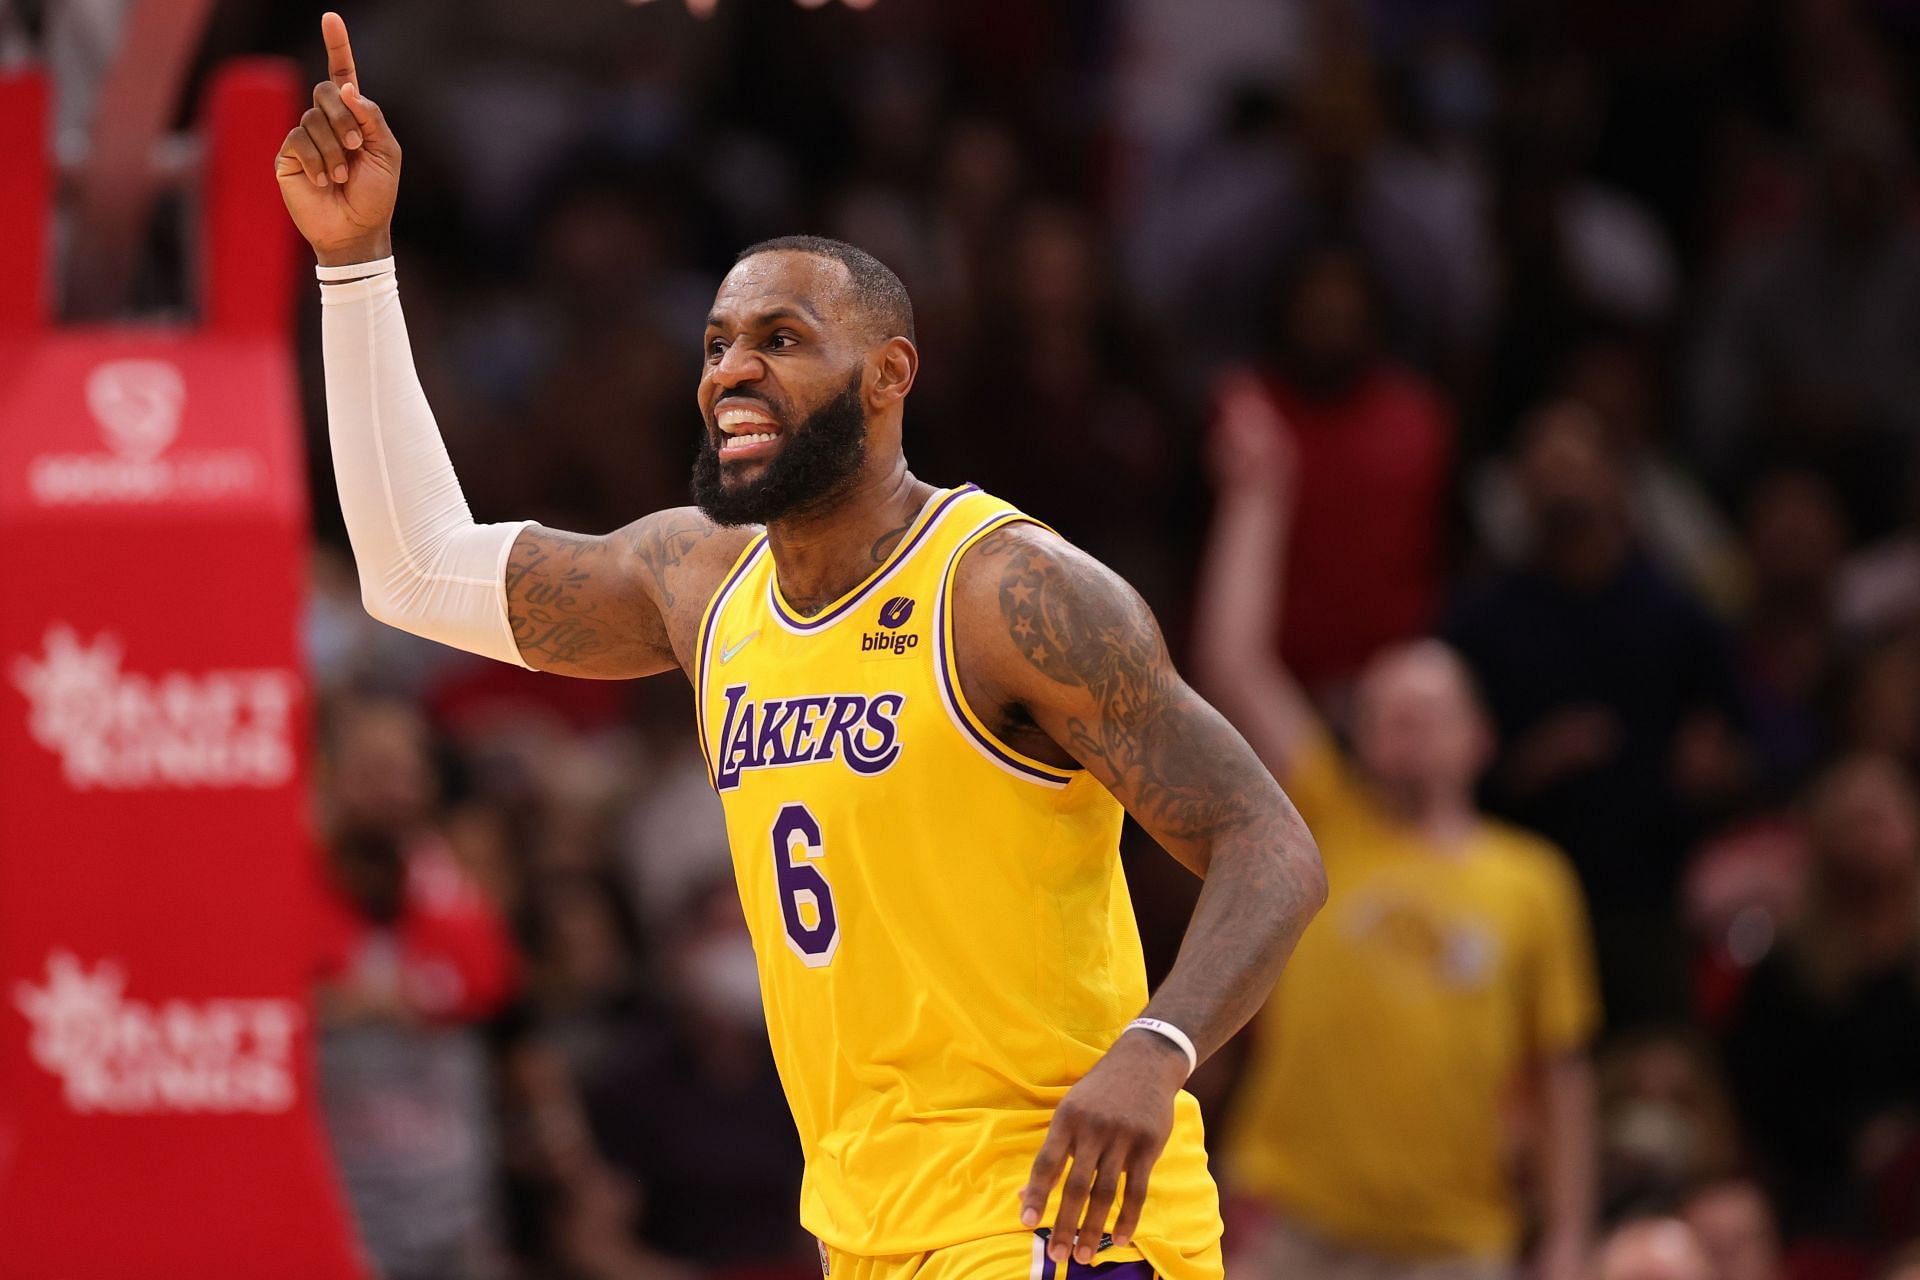 LeBron James brought up his third triple-double of the season versus the Houston Rockets